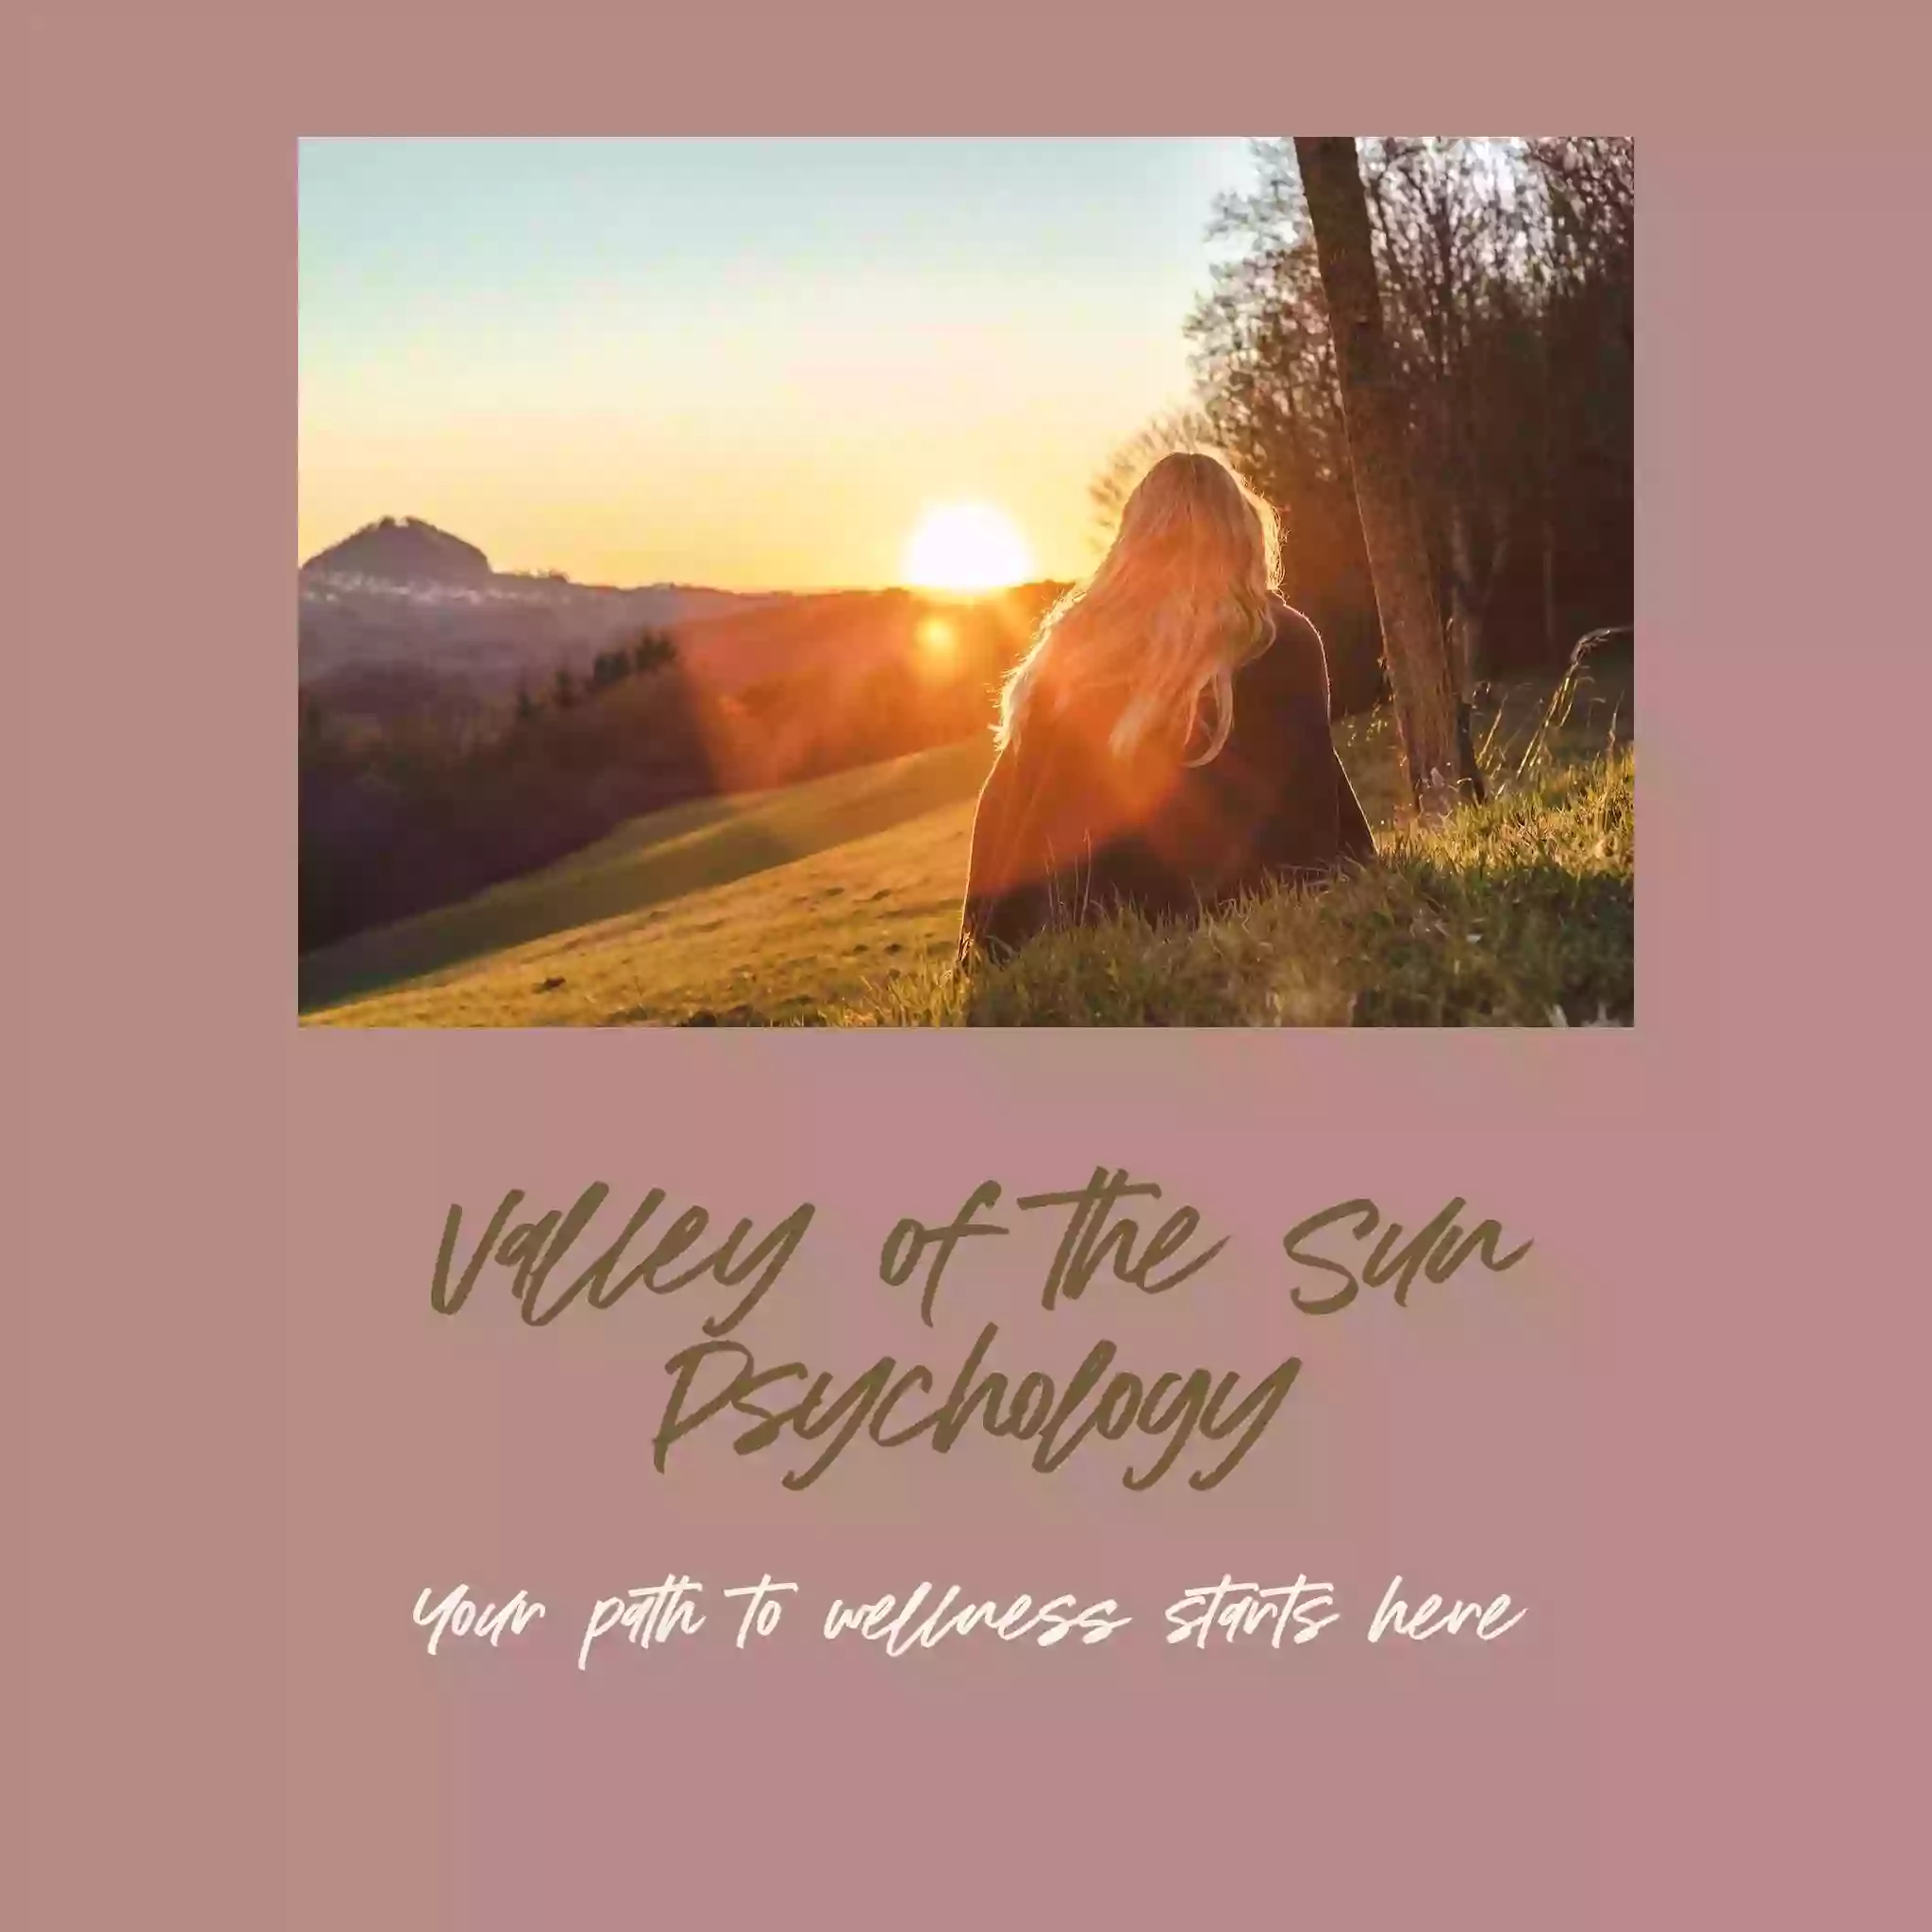 Valley of the Sun Psychology